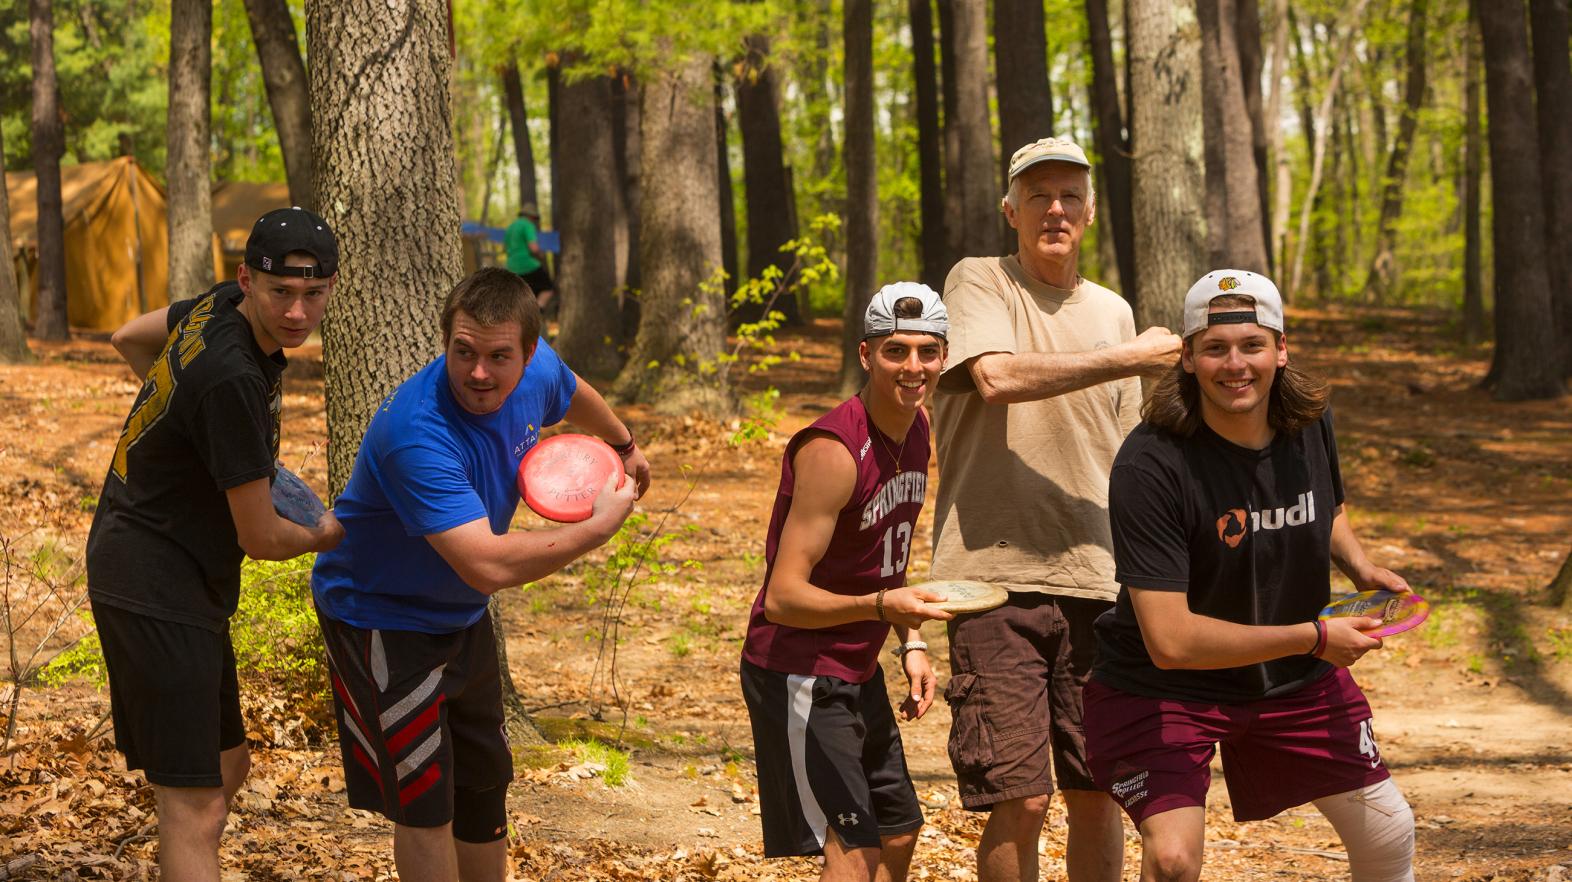 Students learn skills to play disc golf at East Campus during Outdoor Pursuits at Springfield College